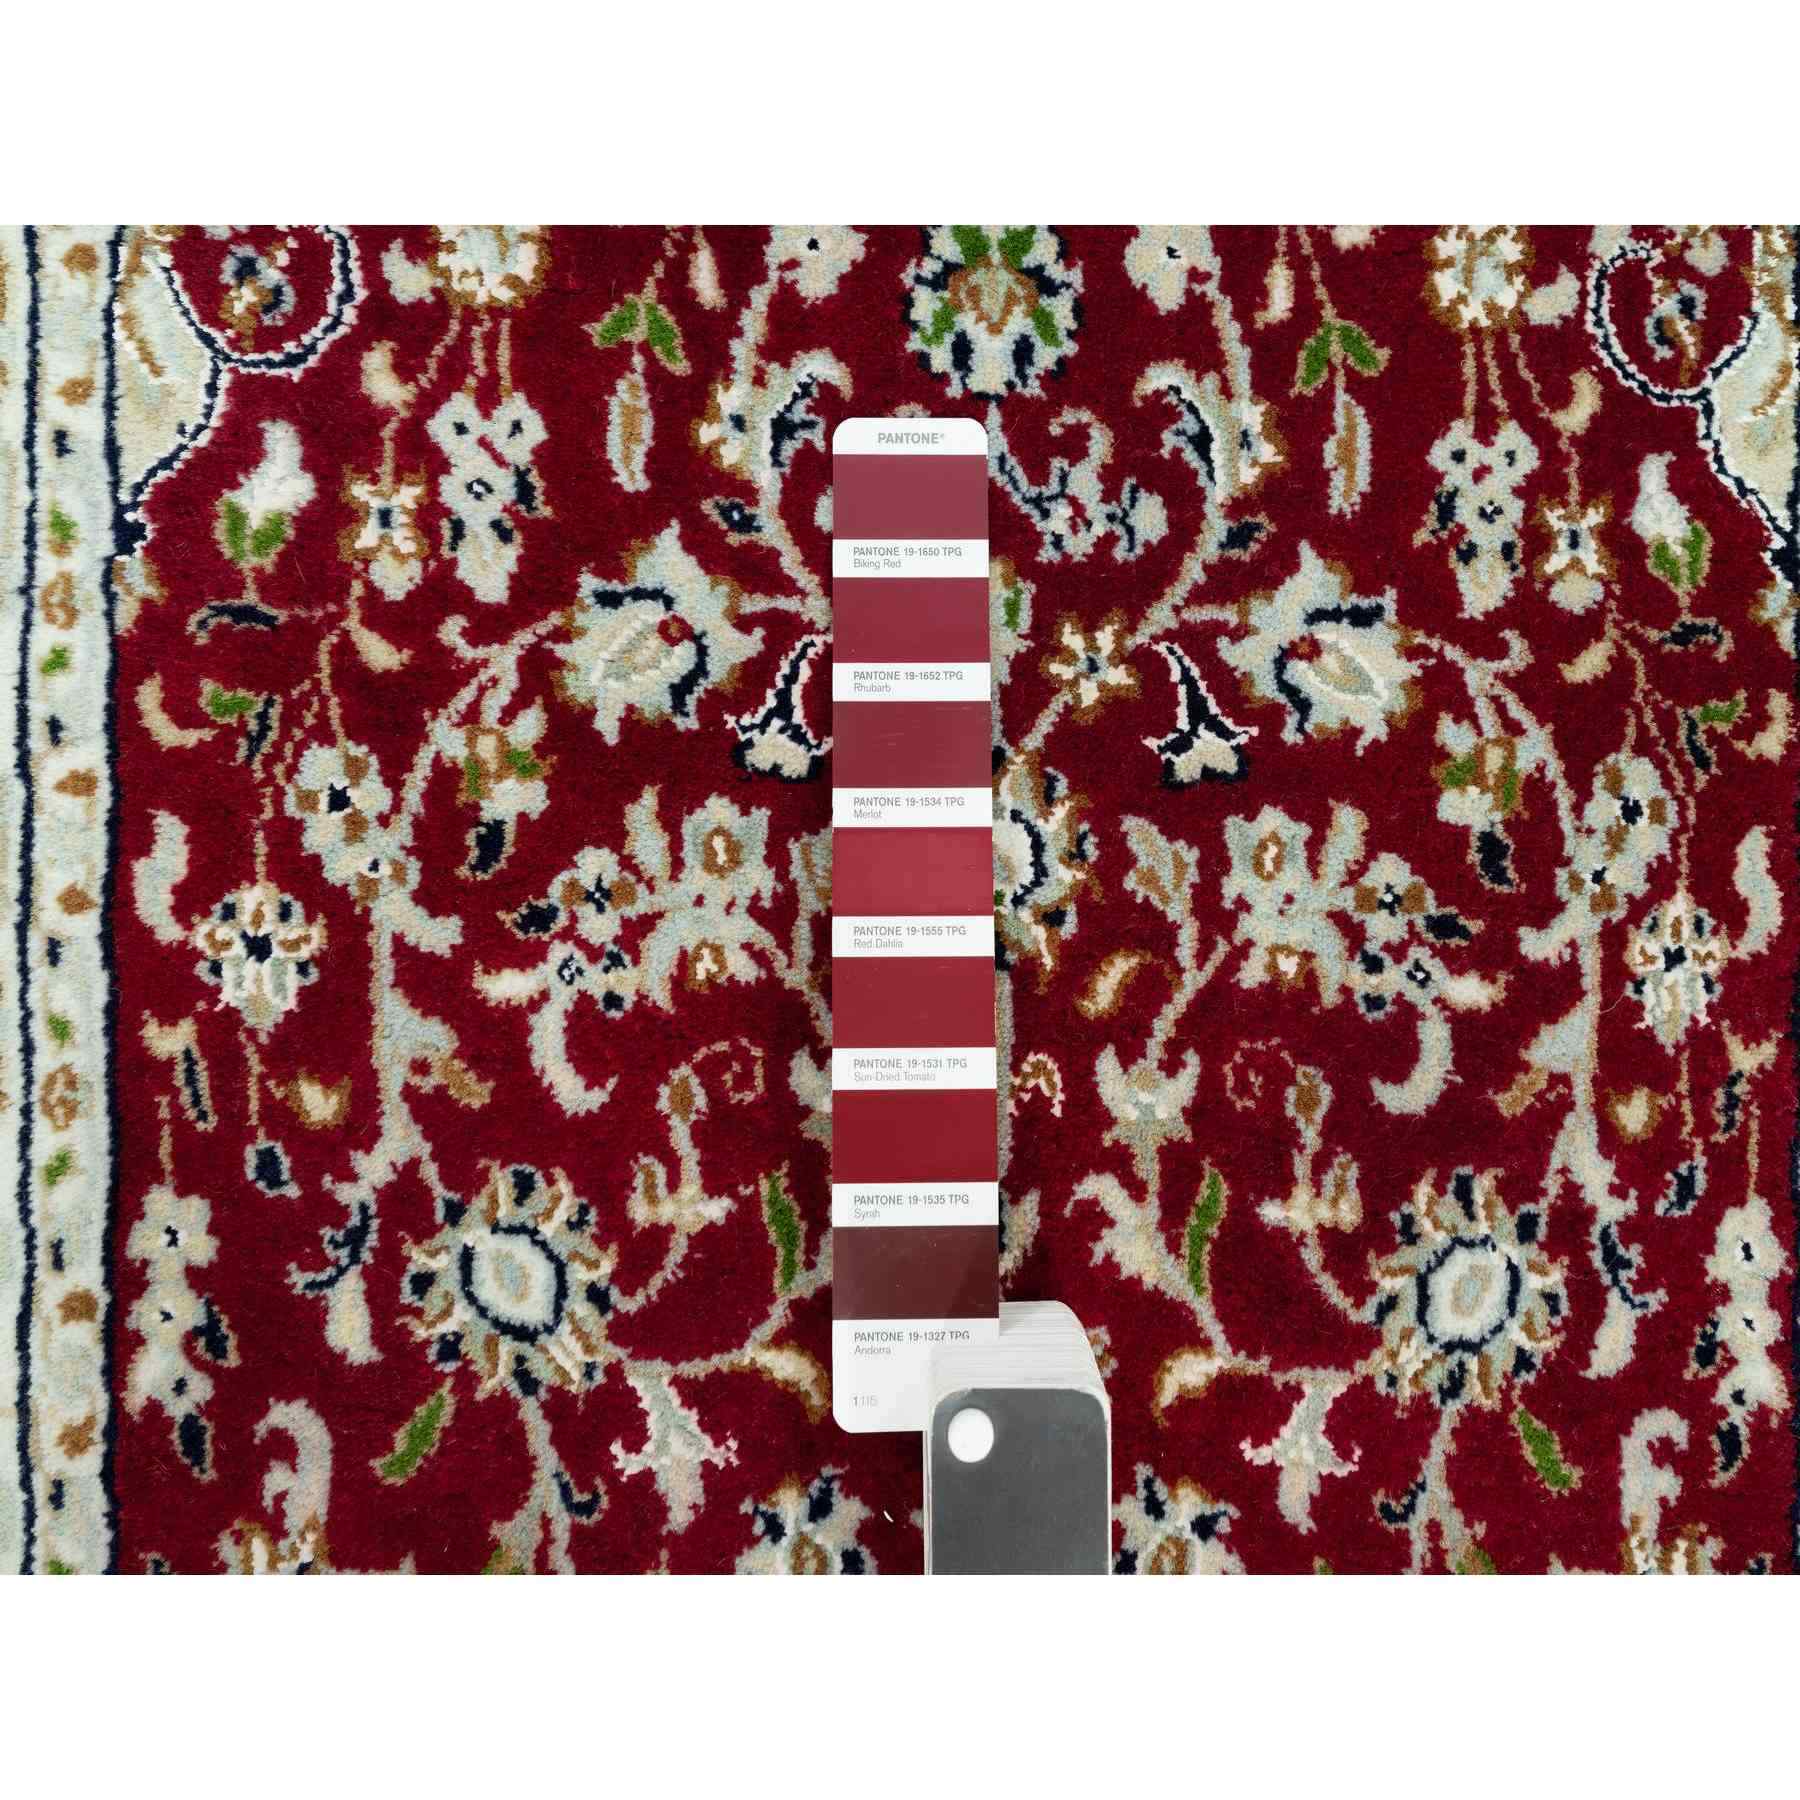 Fine-Oriental-Hand-Knotted-Rug-452580